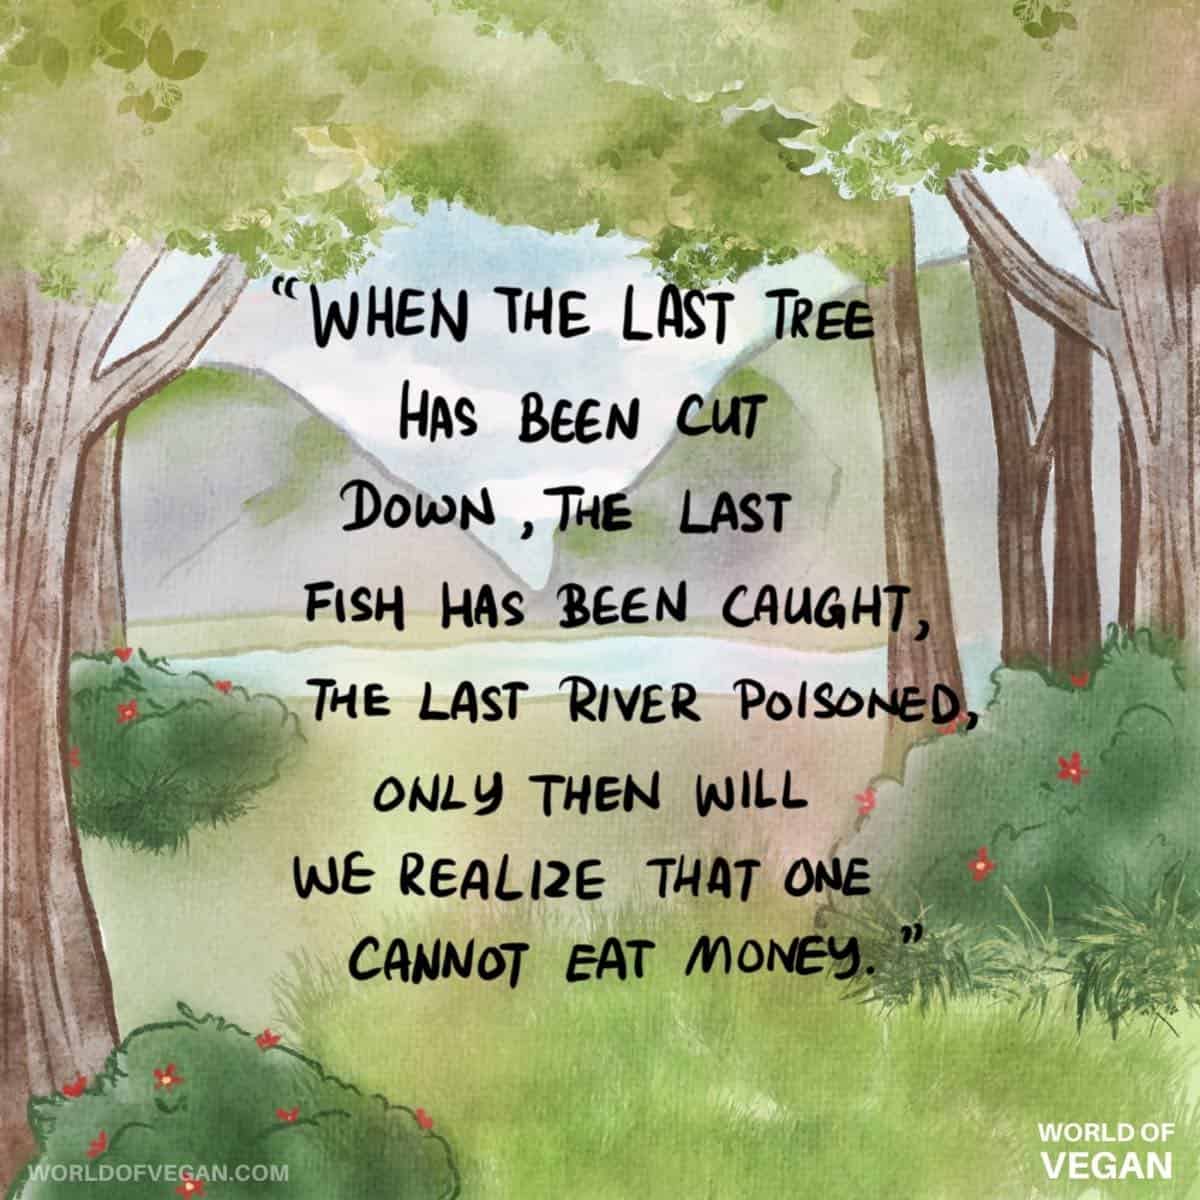 World of vegan art illustration with the quote "when the last tree has been cut down, the last fish caught, the last river poisoned, only then will we realize we cannot eat money."